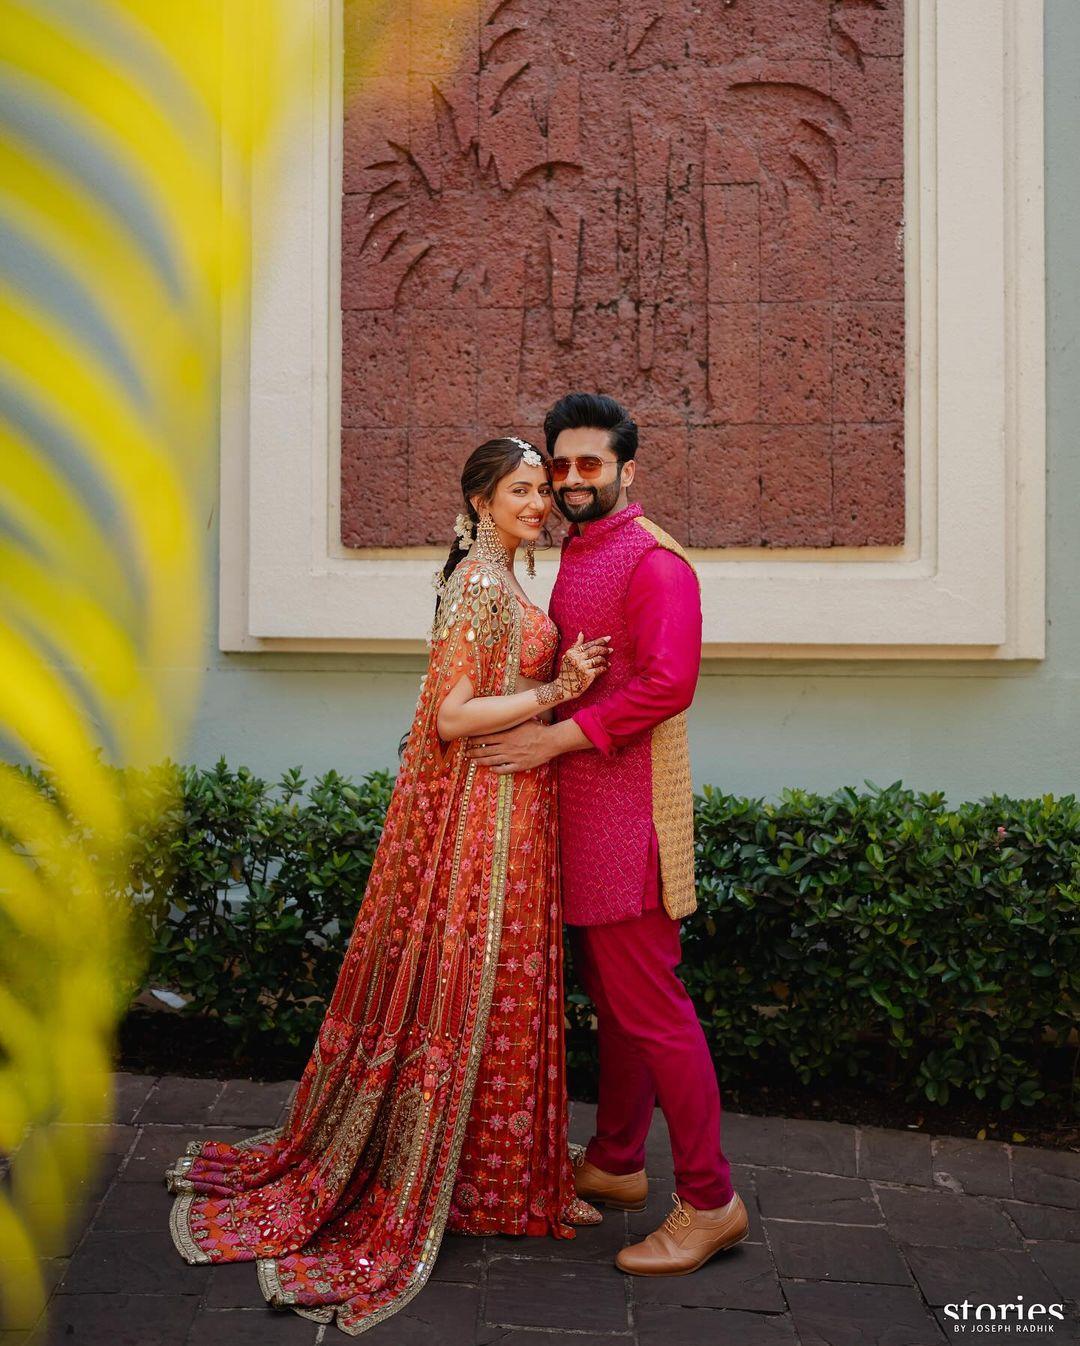 Clad in a bespoke phulkari lehenga by Arpita Mehta in the shade of rust. Paired with a long cape with intricate embroidery, Rakul Preet Singh accessorised her Mehendi look with giant pair of earrings and a maang tika. Jackky Bhagnani on the other hand wore a hot pink sherwani set